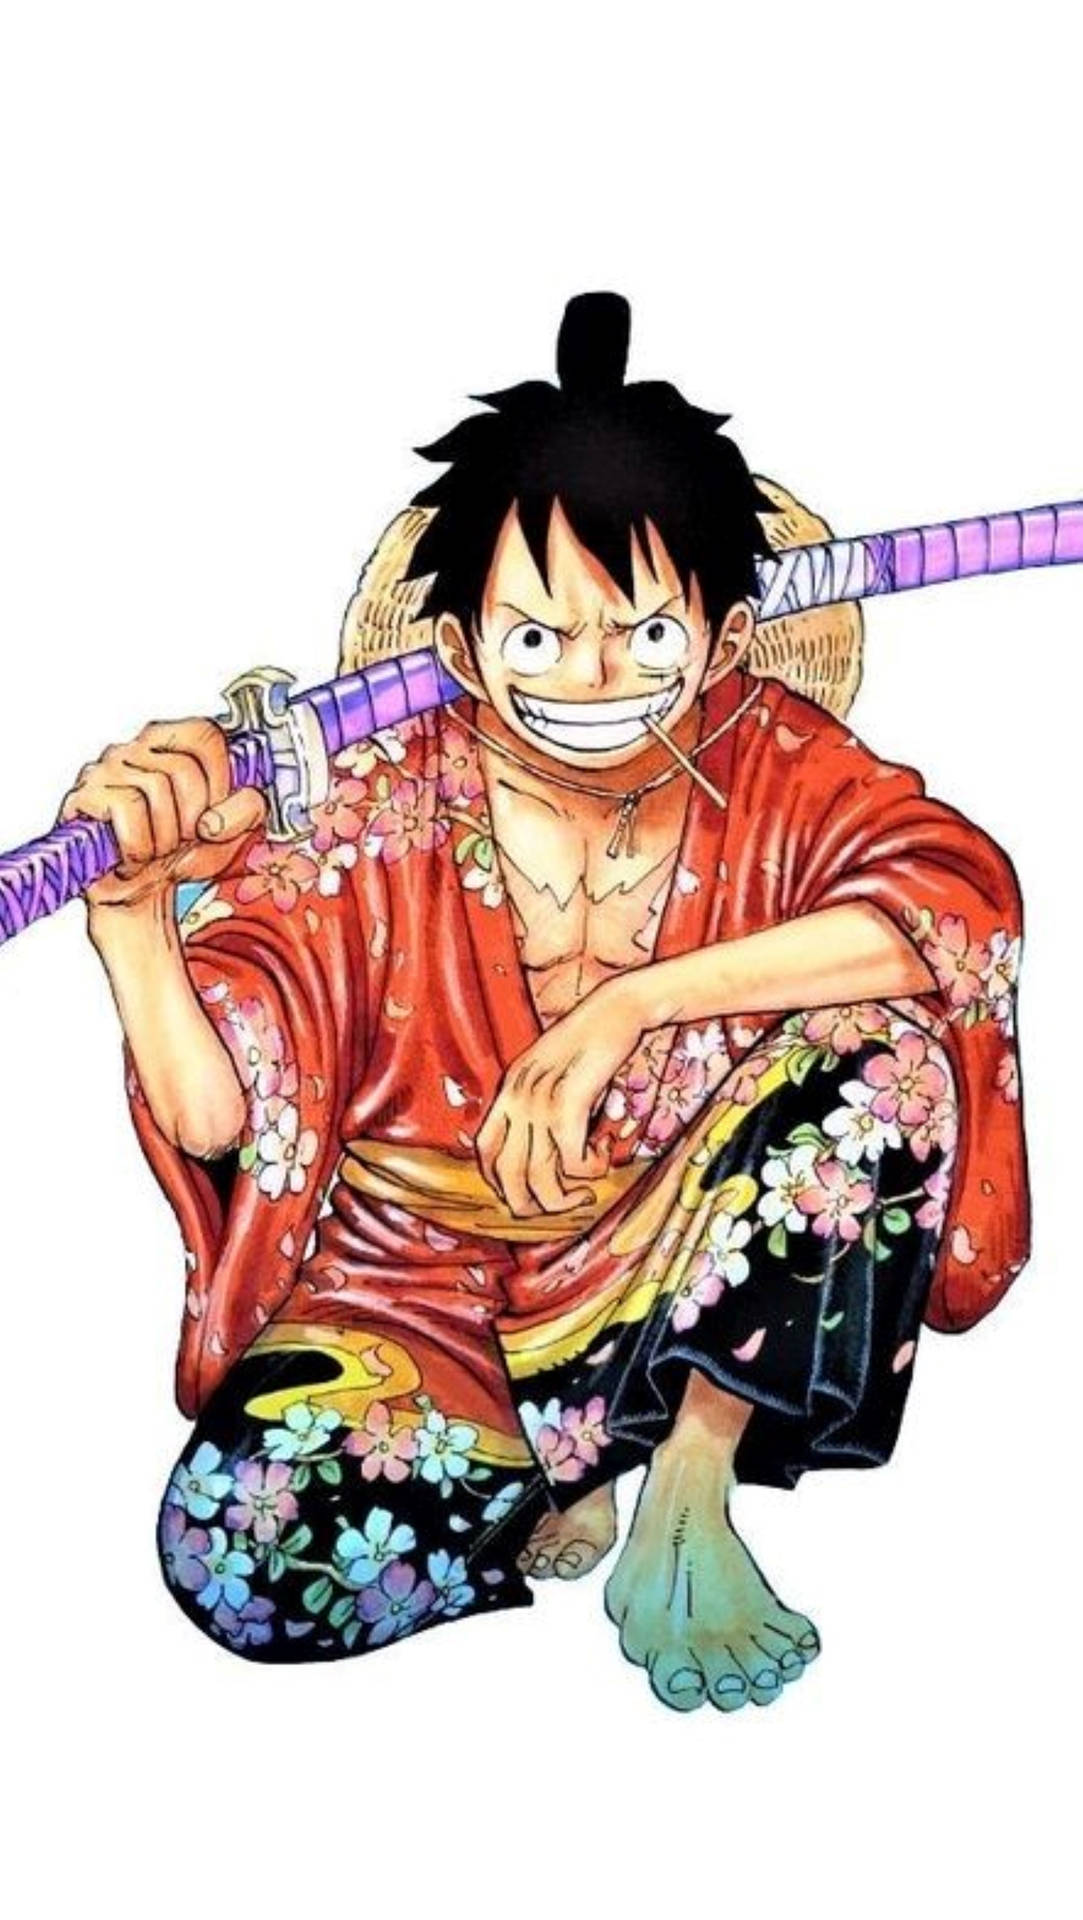 Monkey D Luffy In Zoro Outfit Background